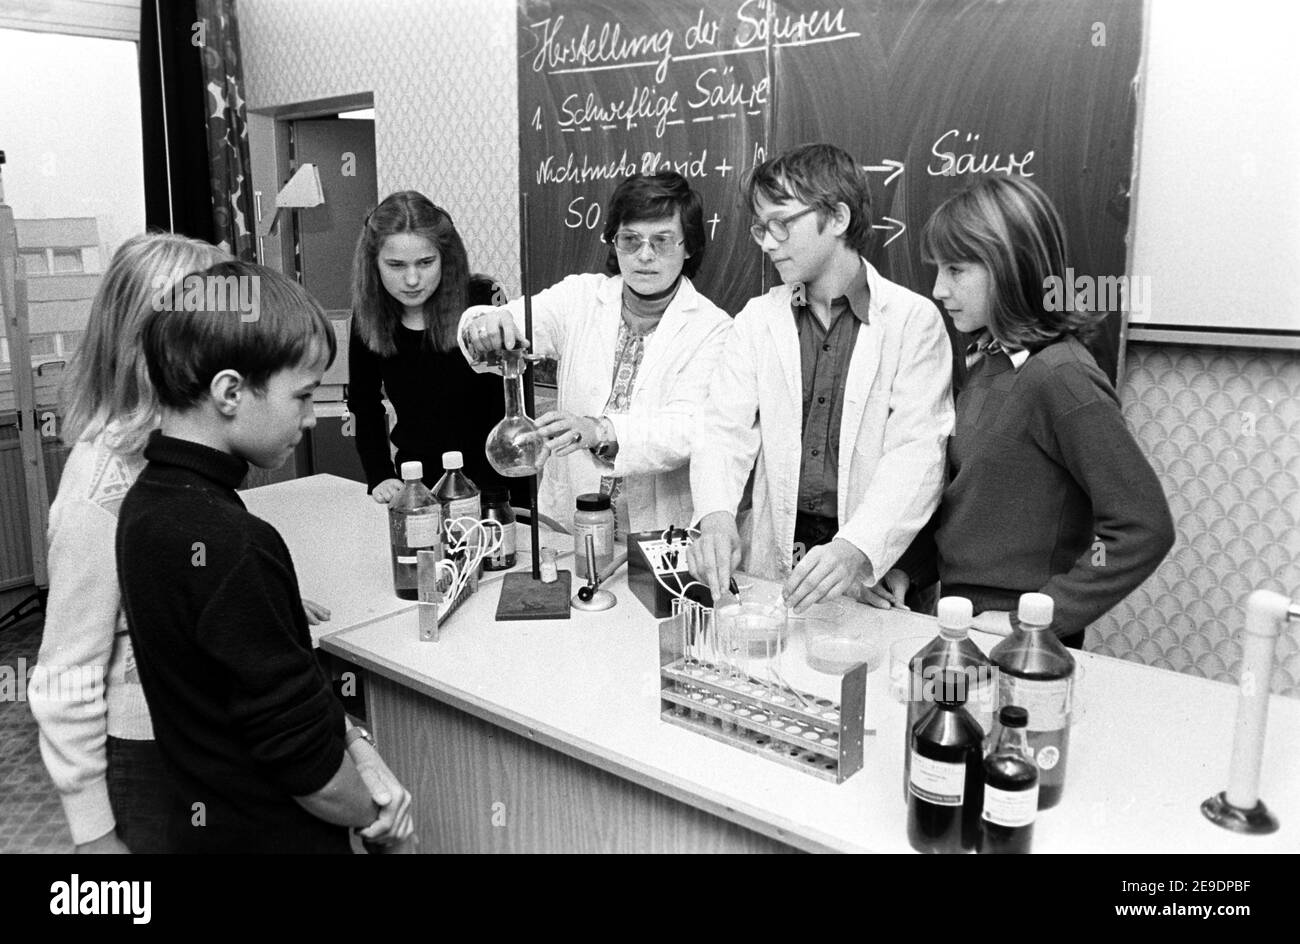 30 November 1984, Saxony, Delitzsch: Both chemistry lessons and the employment of study groups take place in the subject cabinet in the mid-1980s in a secondary school in Delitzsch. Exact date of recording not known. Photo: Volkmar Heinz/dpa-Zentralbild/ZB Stock Photo